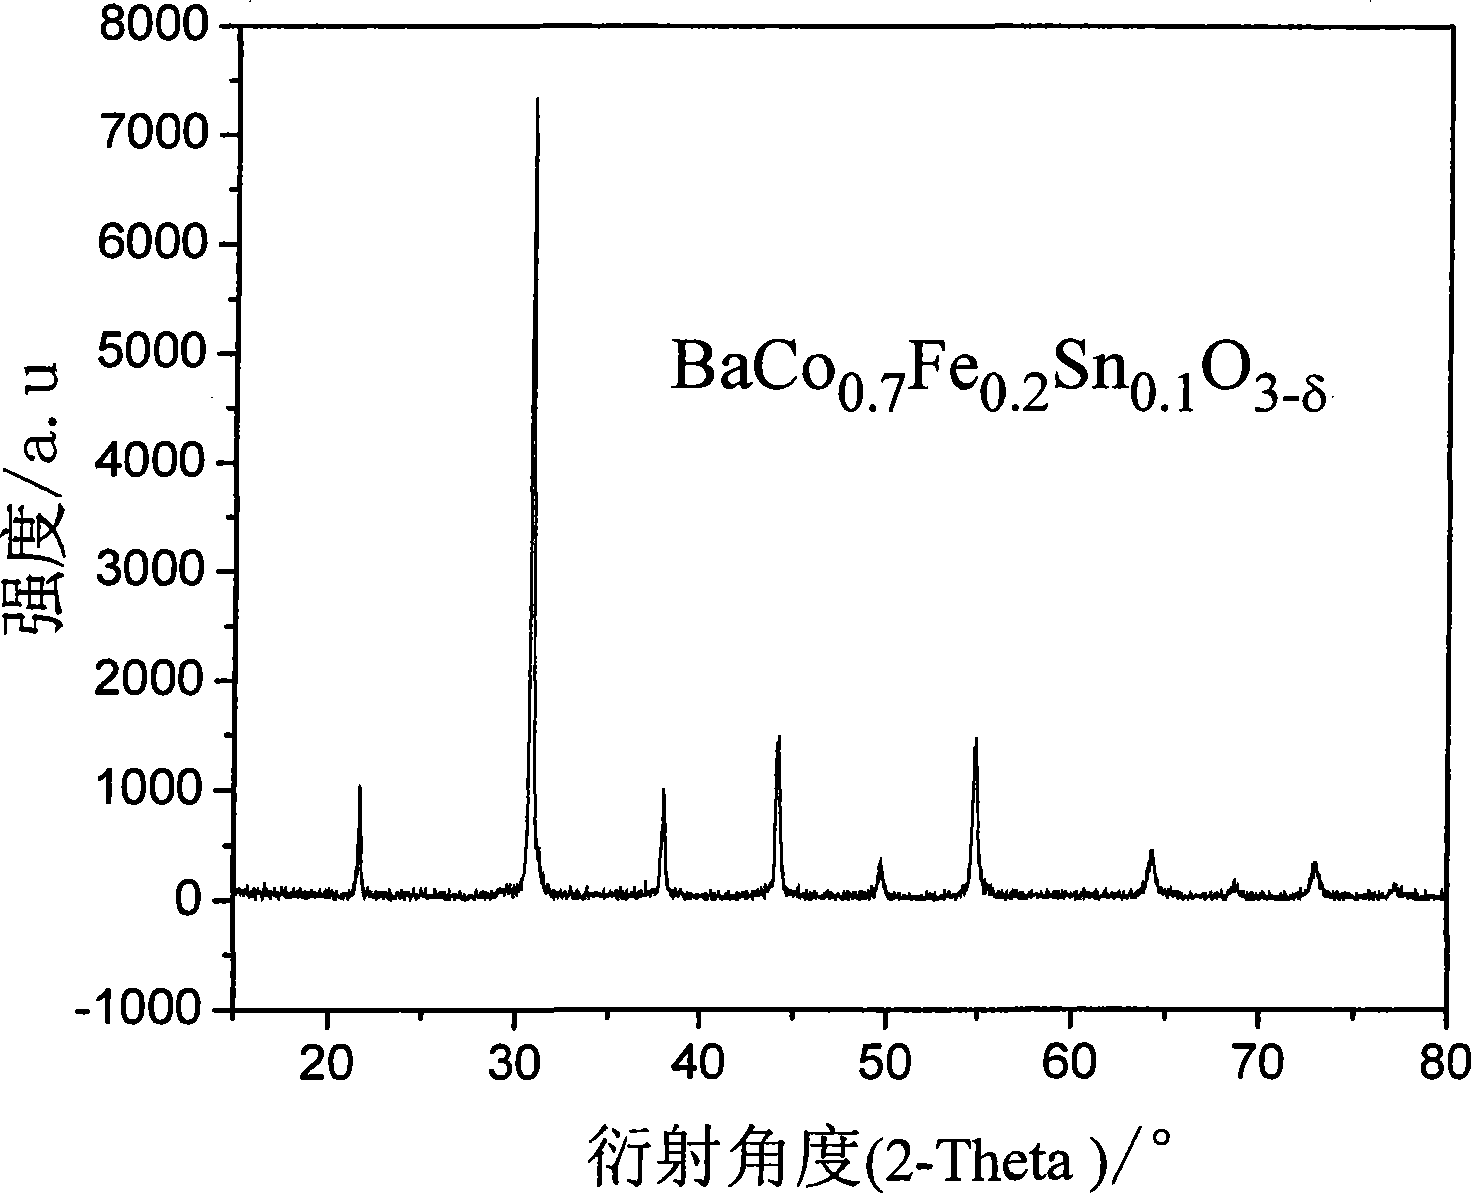 BaCoO3 based perovskite type ceramic oxygen-permeable membrane material with Sn, Fe doped at B position